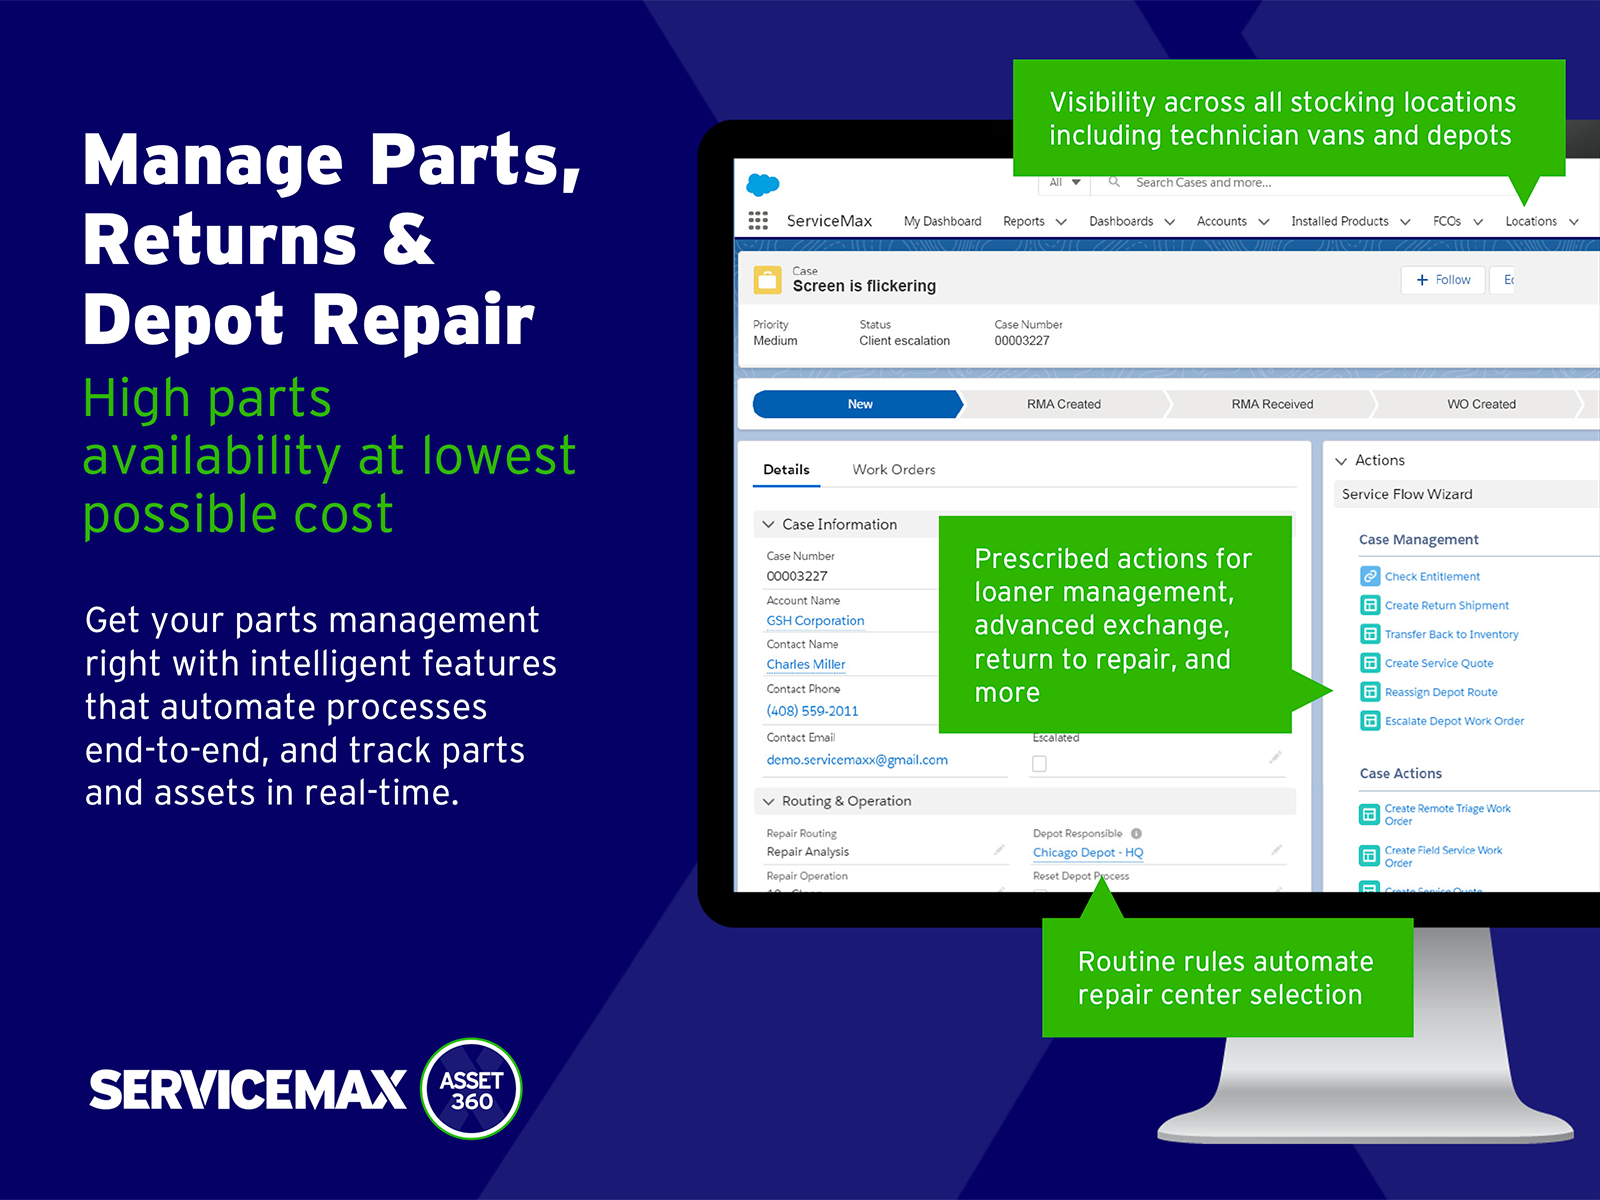 Make your inventory processes more efficient with spare parts, returns and depot repair management with ServiceMax Asset 360.